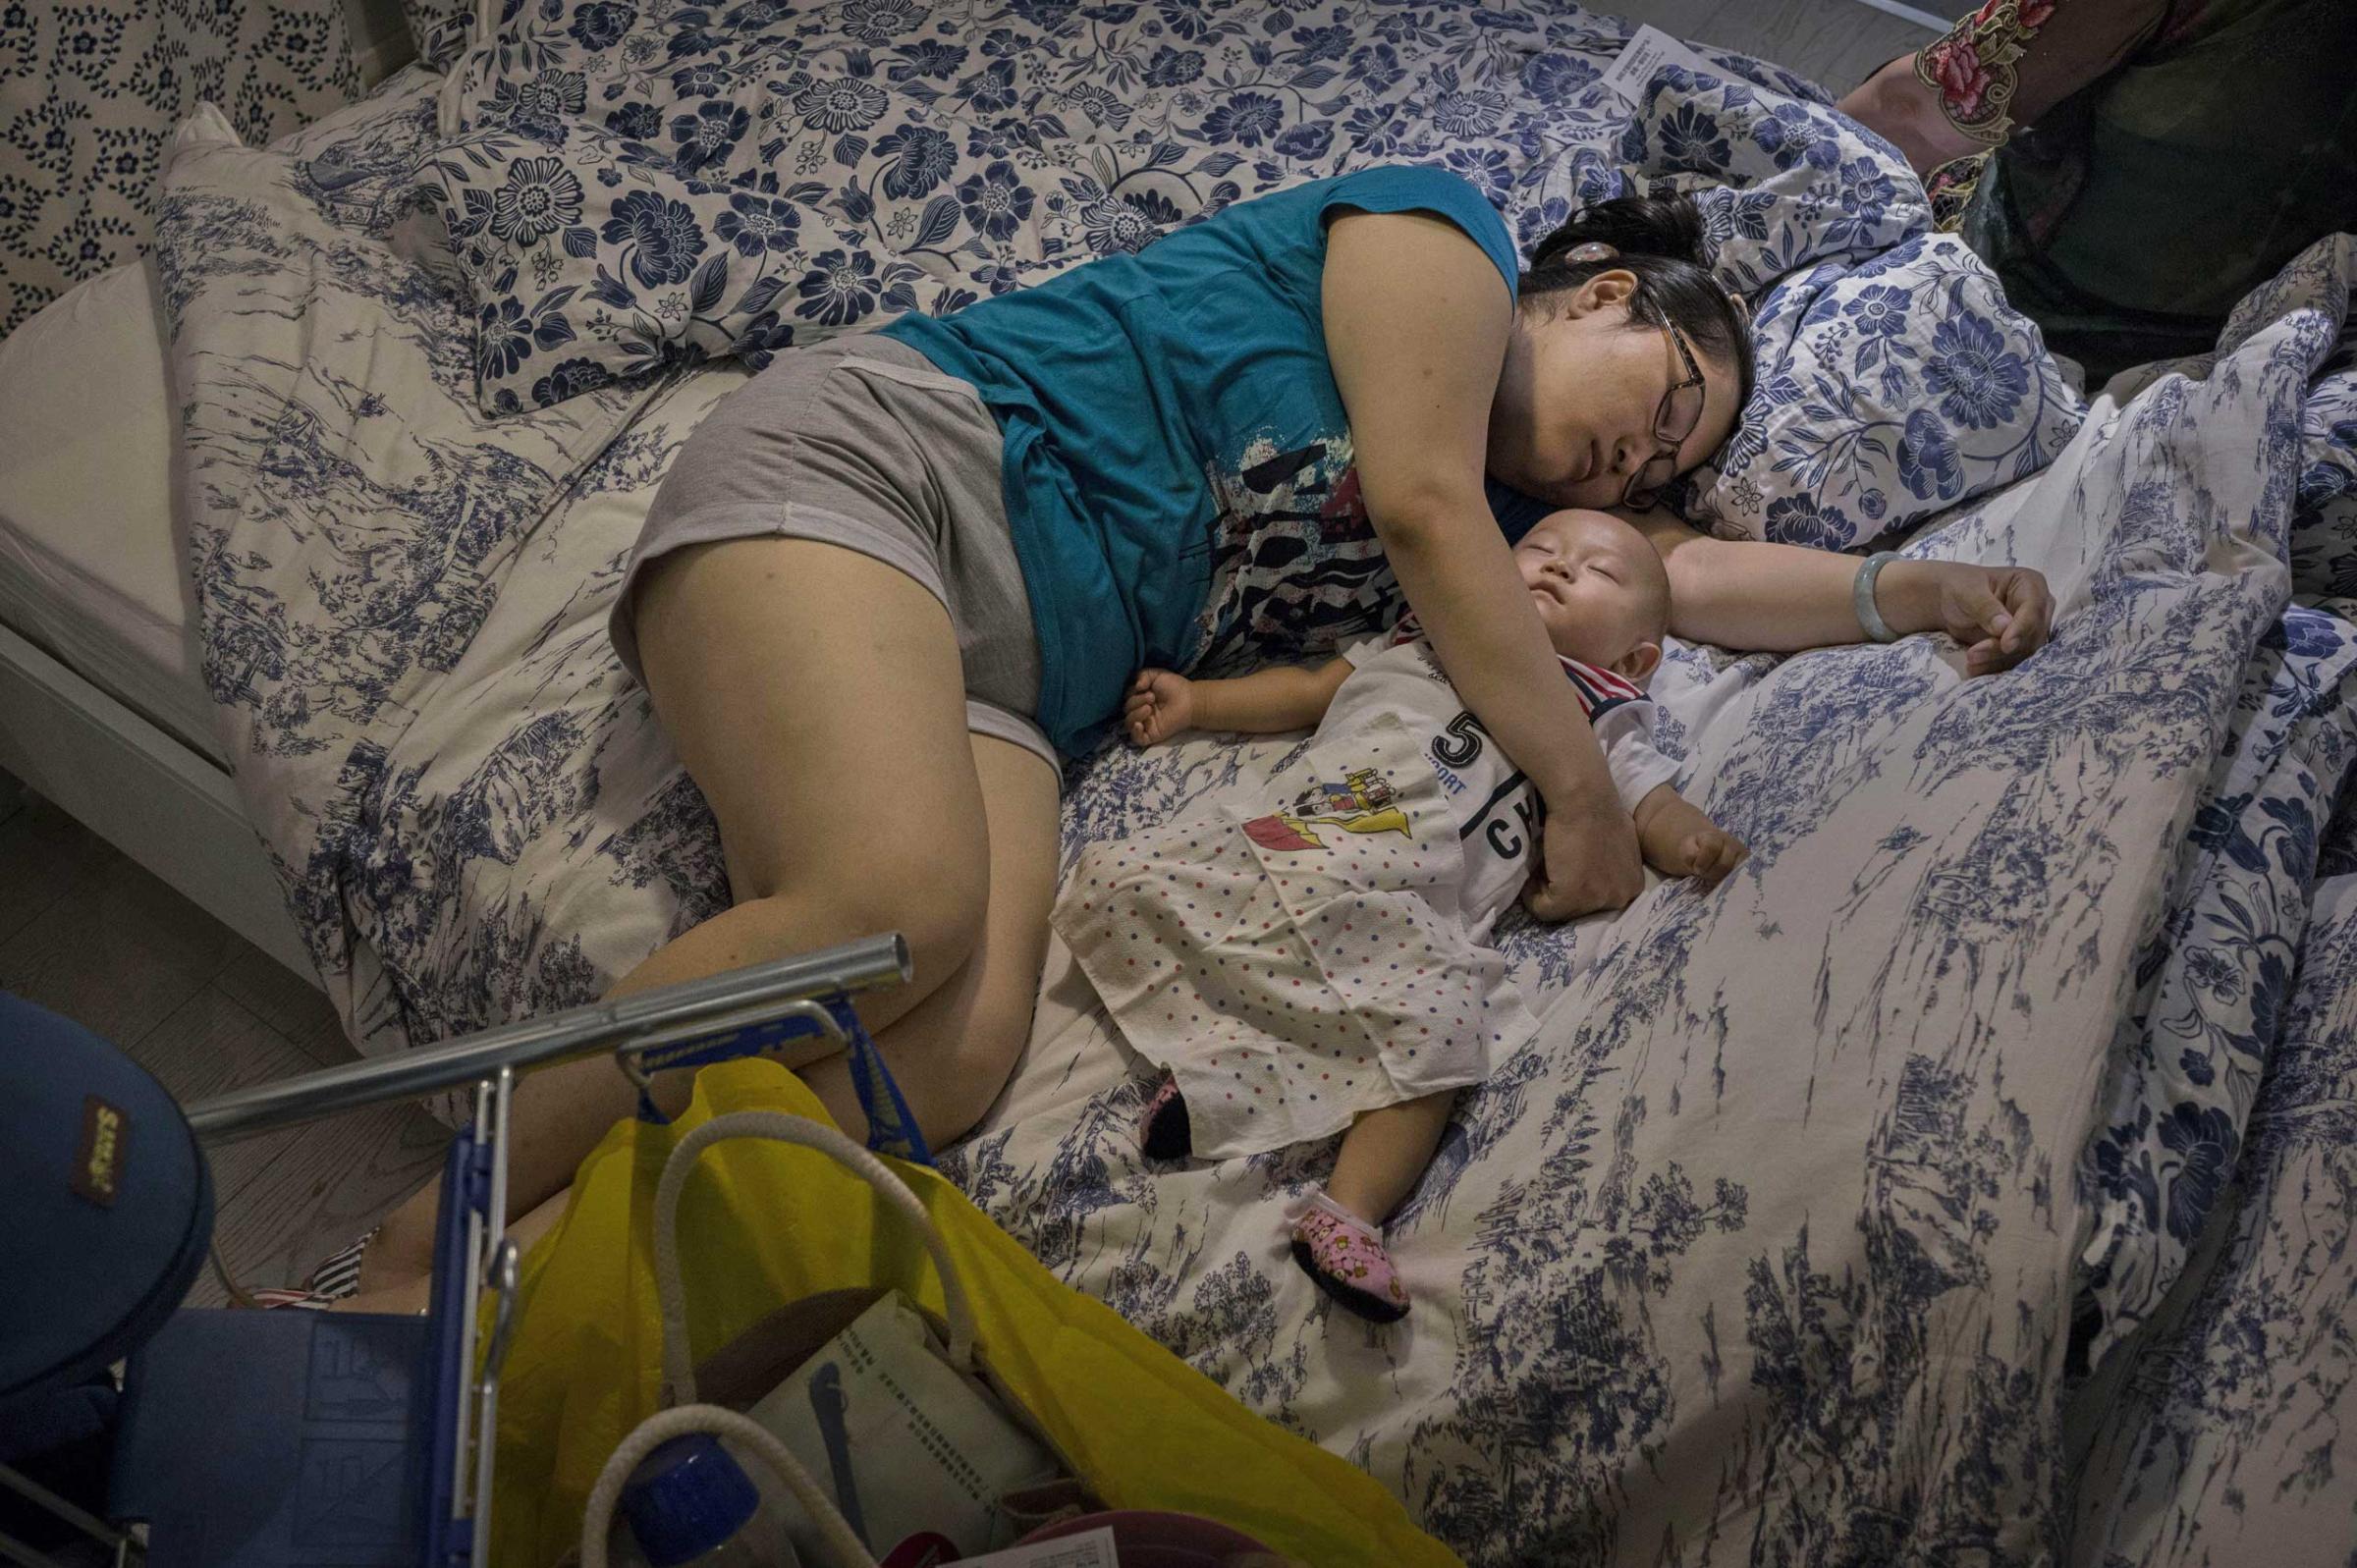 A Chinese shopper sleeps with her child on a bed in the showroom of an IKEA store in Beijing, July 6, 2014.